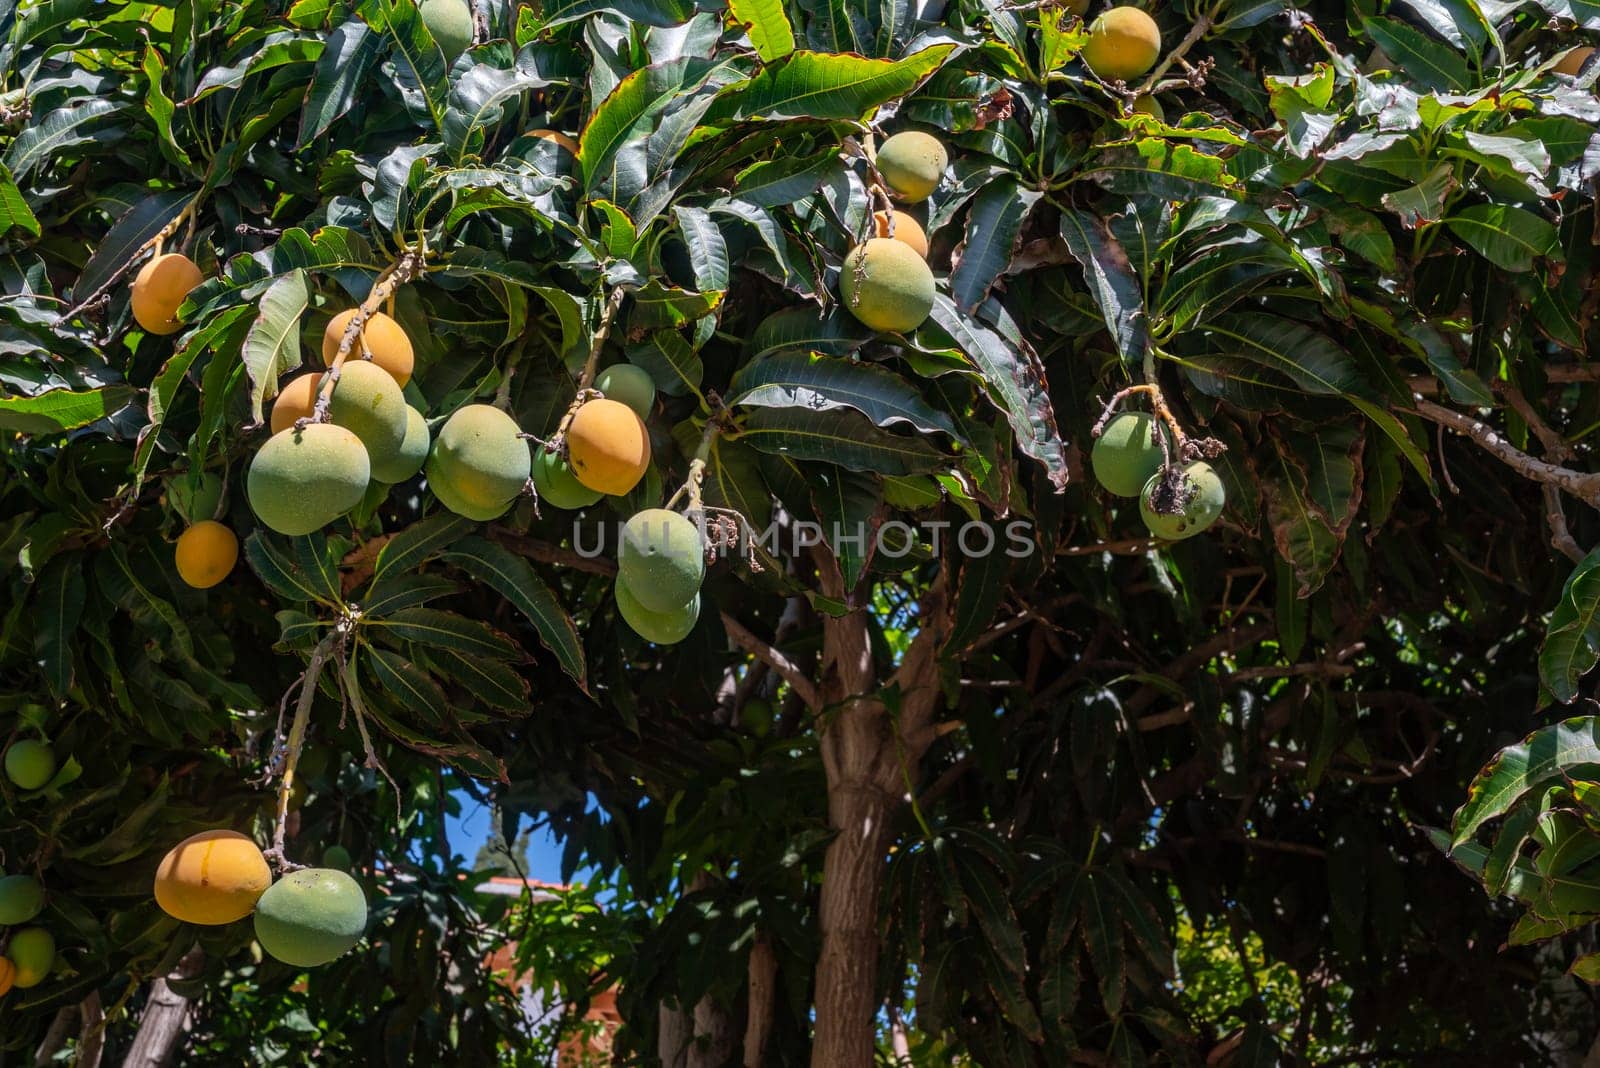 Ripe yellow and green nispero fruit growing on a tree. Japanese loquat, asian tropical fruit. Japanese medlar in the wild nature of Tenerife, Canary islands, Spain. Summer or autumn nature wallpaper